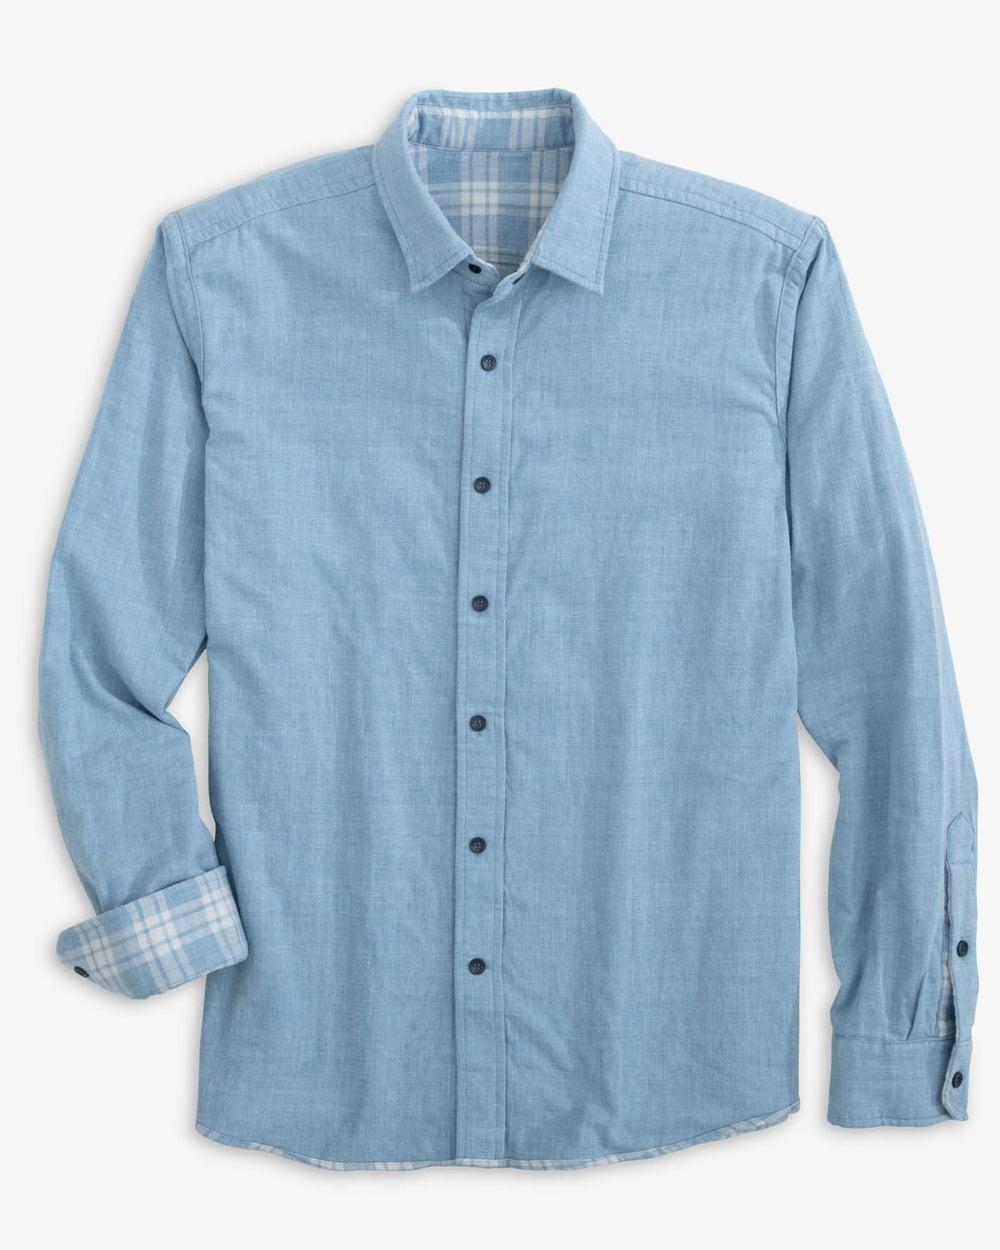 The reverse view of the Southern Tide Heather Melbourne Reversible Plaid Sport Shirt by Southern Tide - Heather Mountain Spring Blue